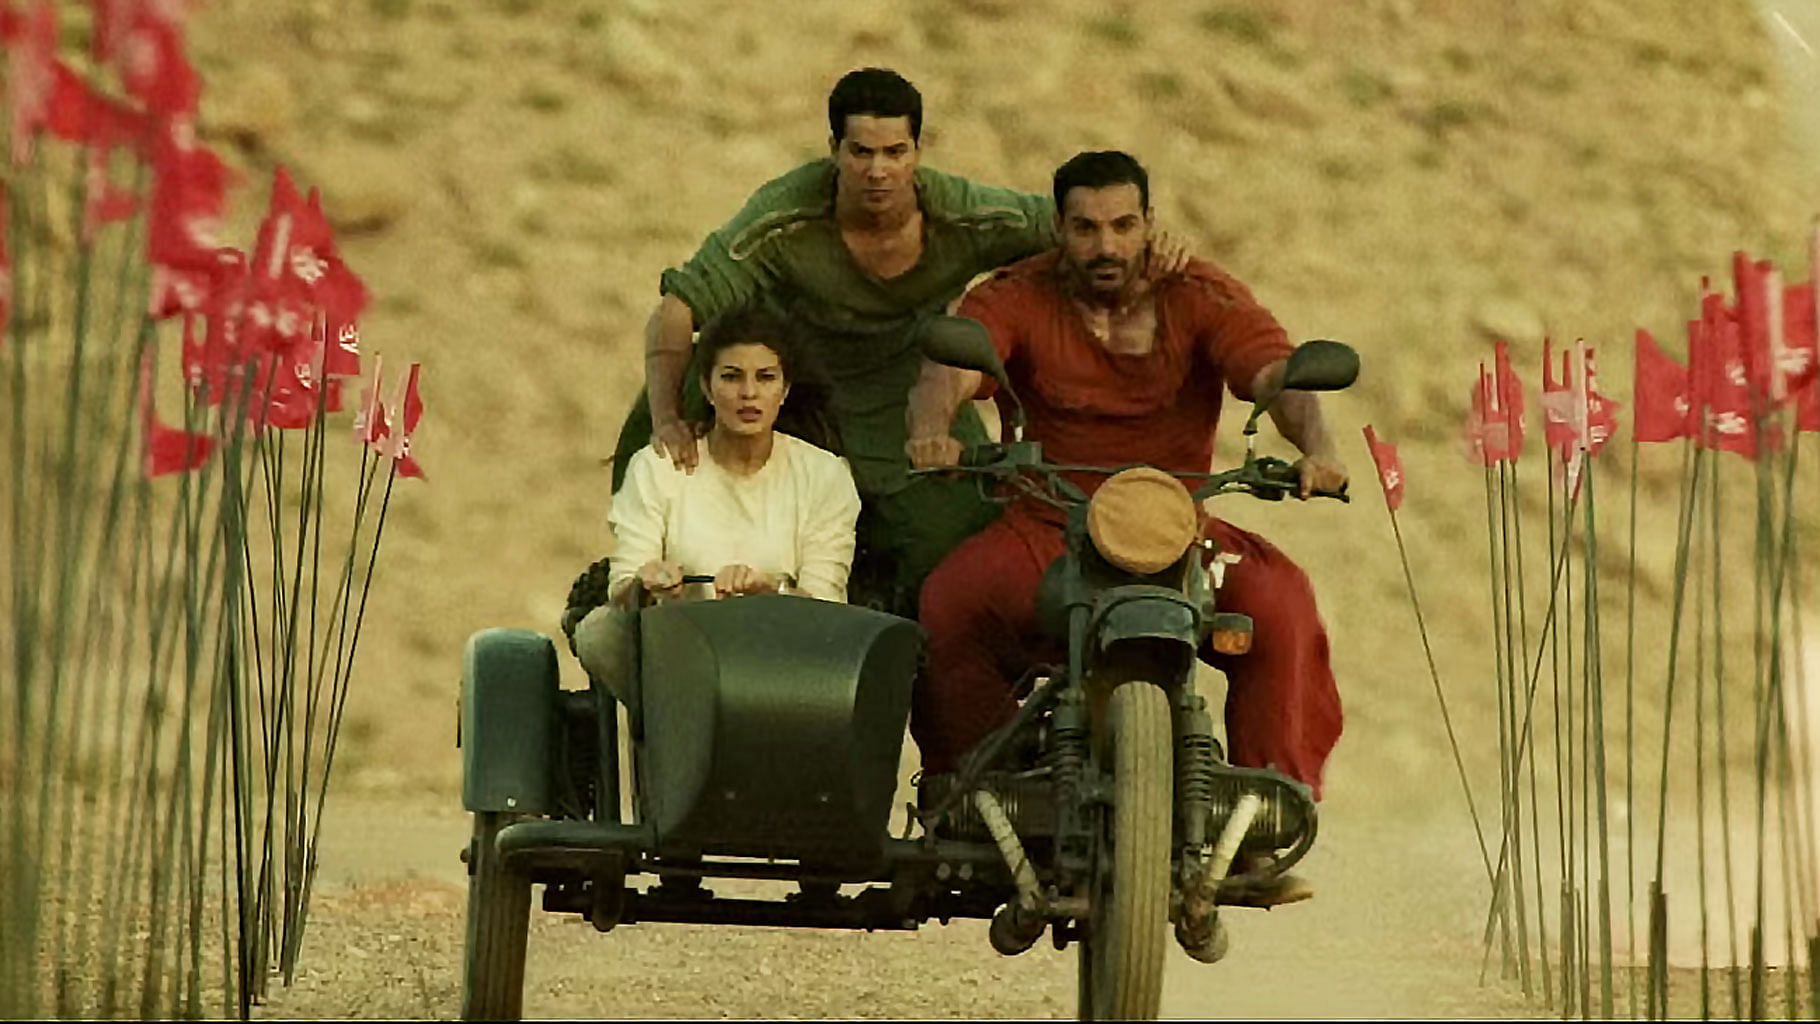 A still from Dishoom. (Photo Courtesy: Dishoom promotional material)